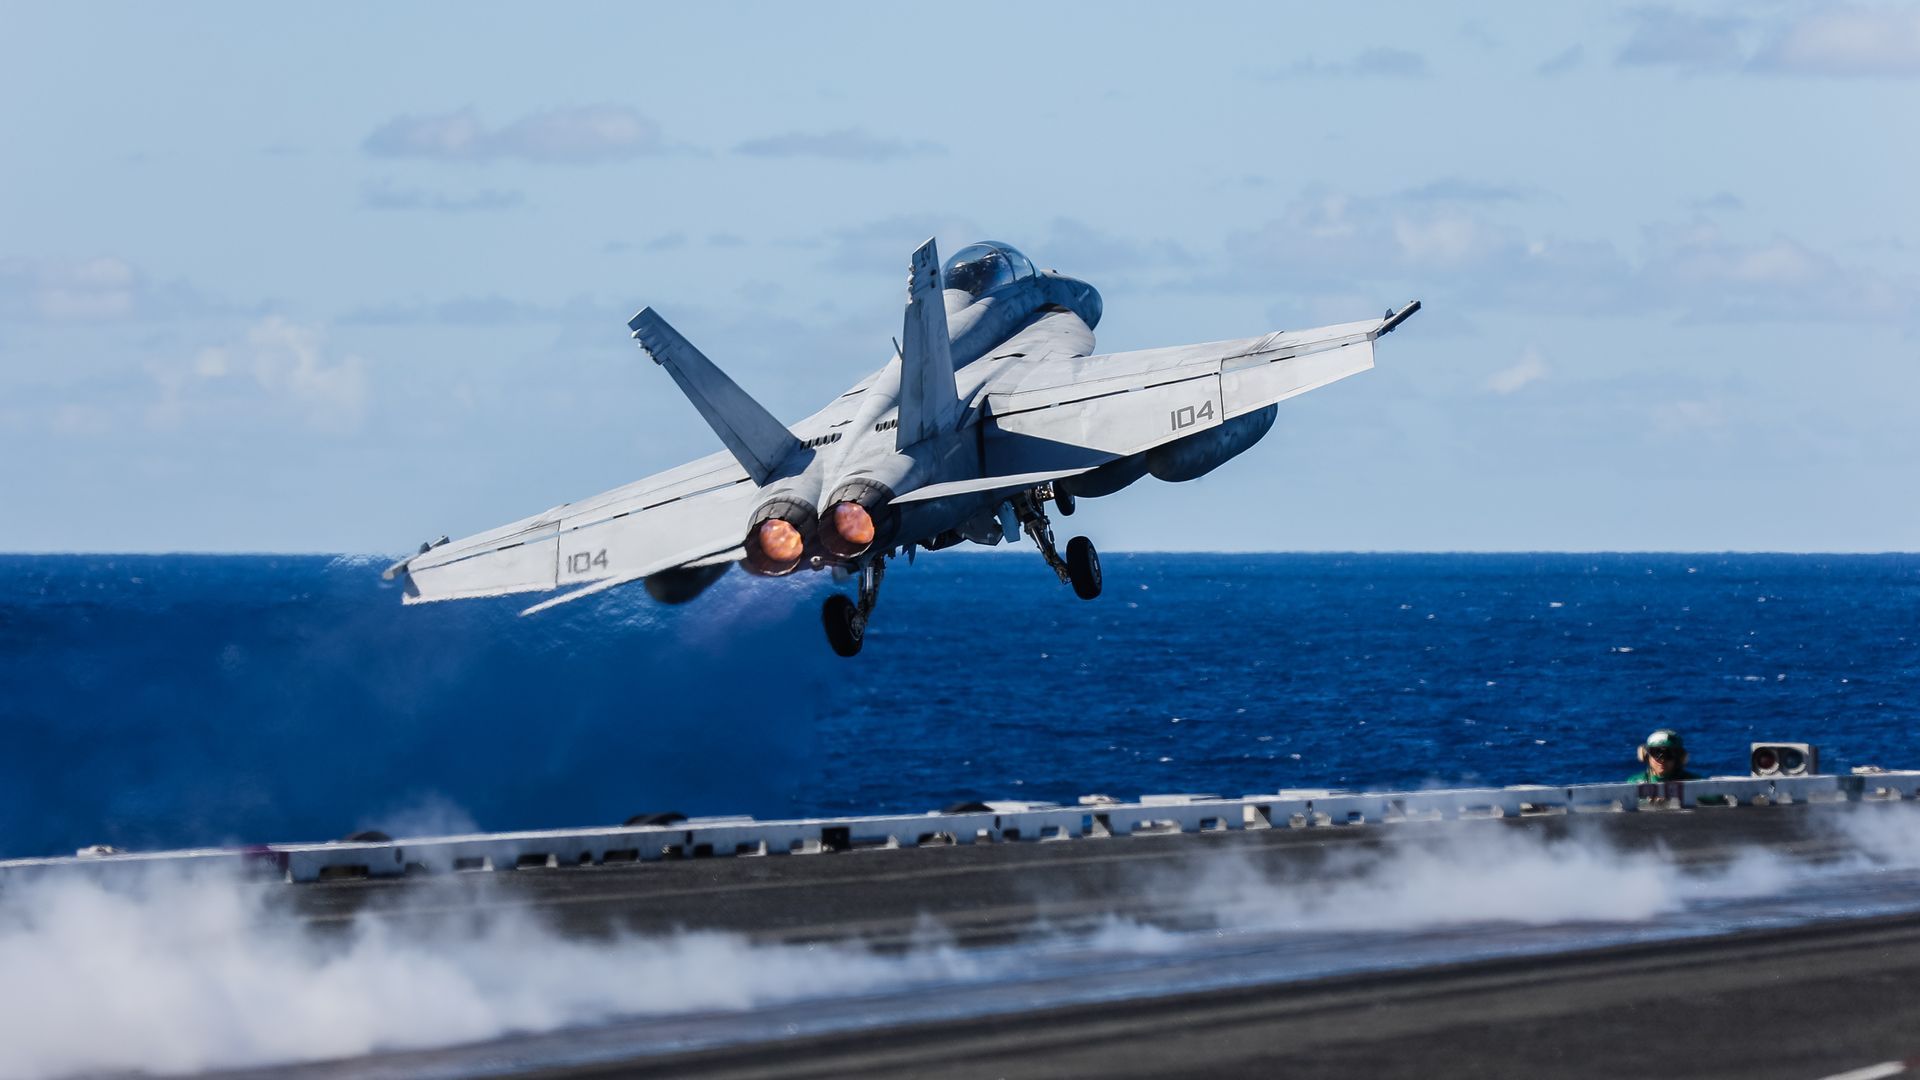 A fighter jet is taking off from a carrier.